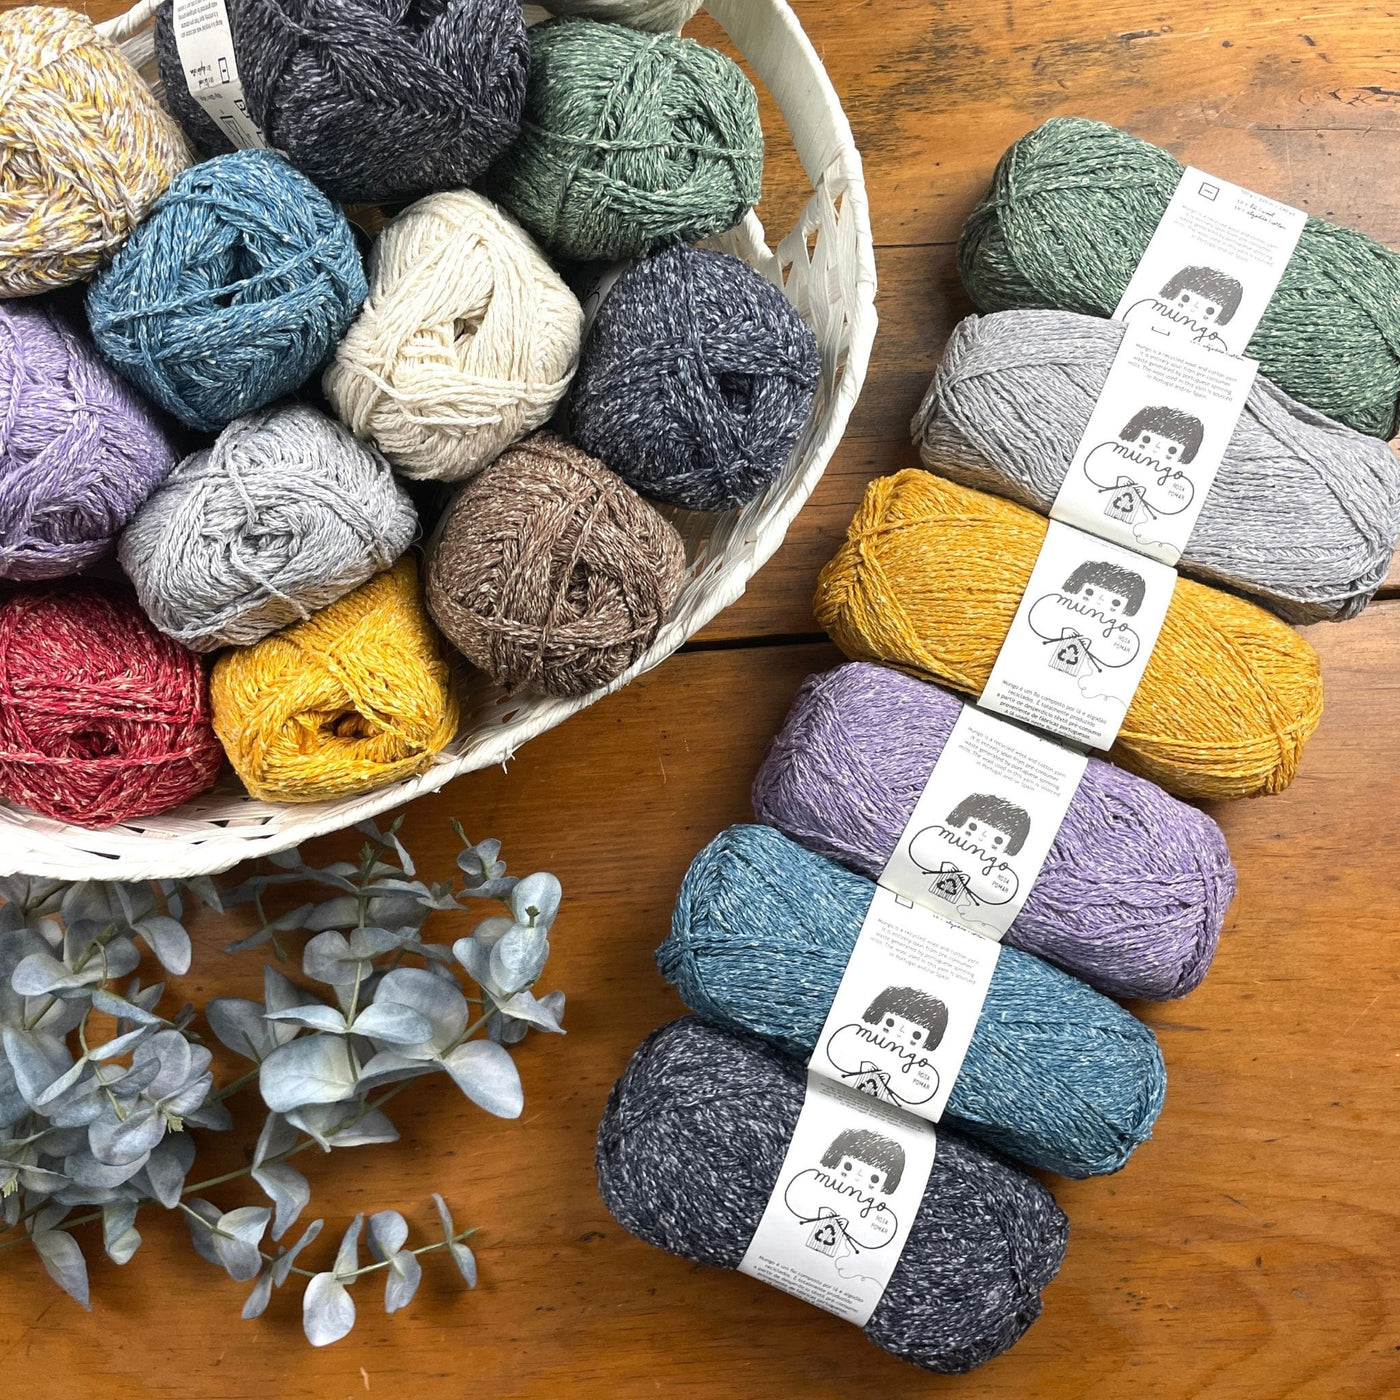 Mungo Worsted Weight Yarn – The Woolly Thistle